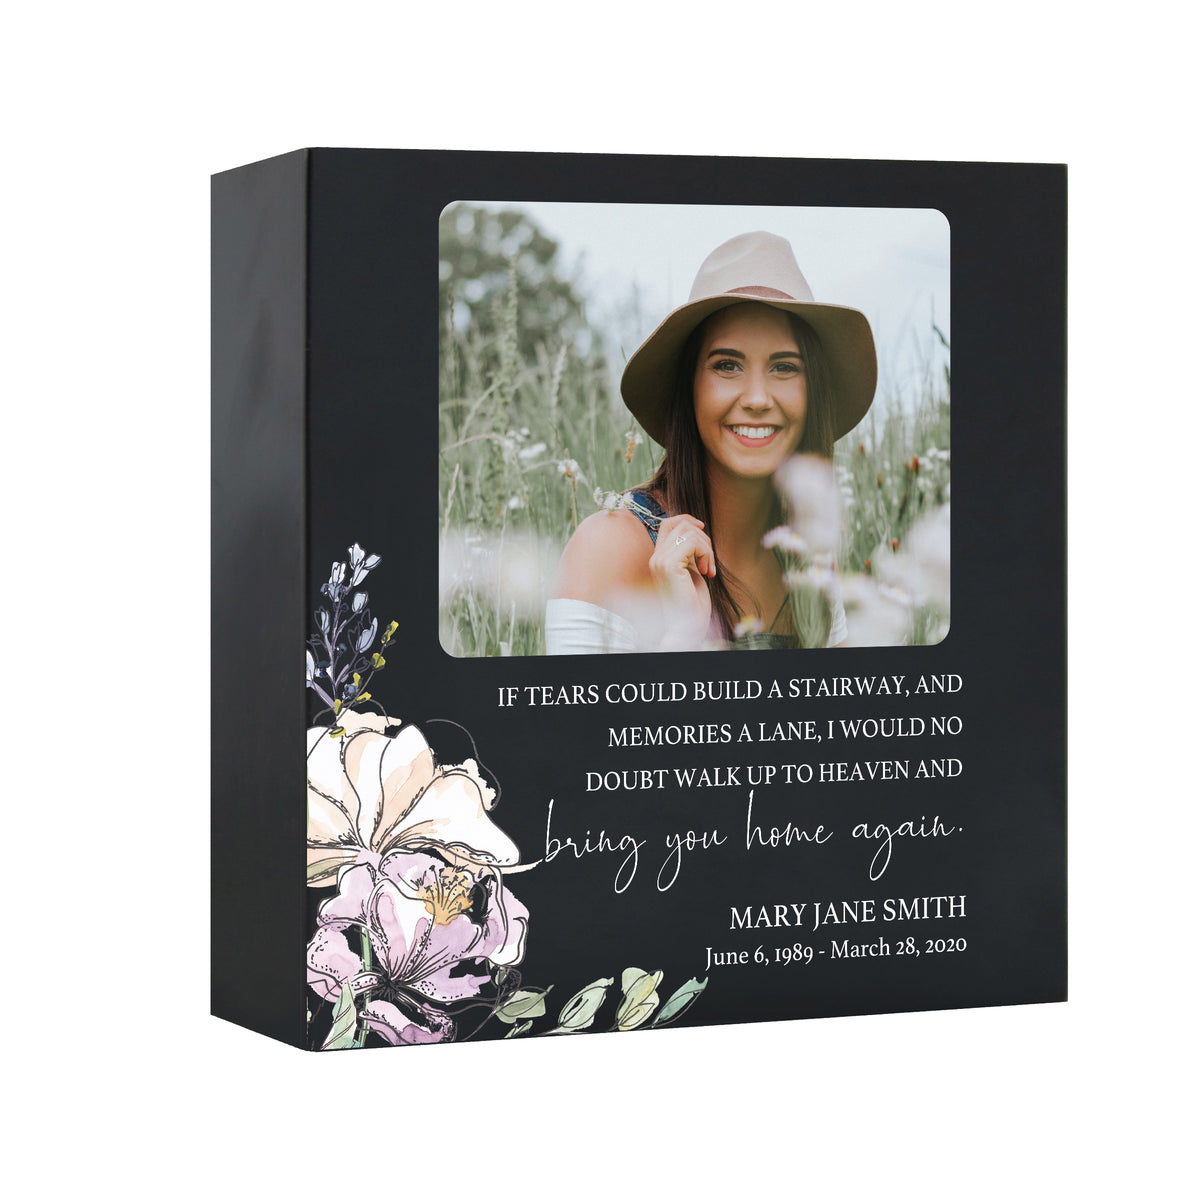 Timeless Human Memorial Shadow Box Photo Urn in Black - If Tears Could Build A Stairway